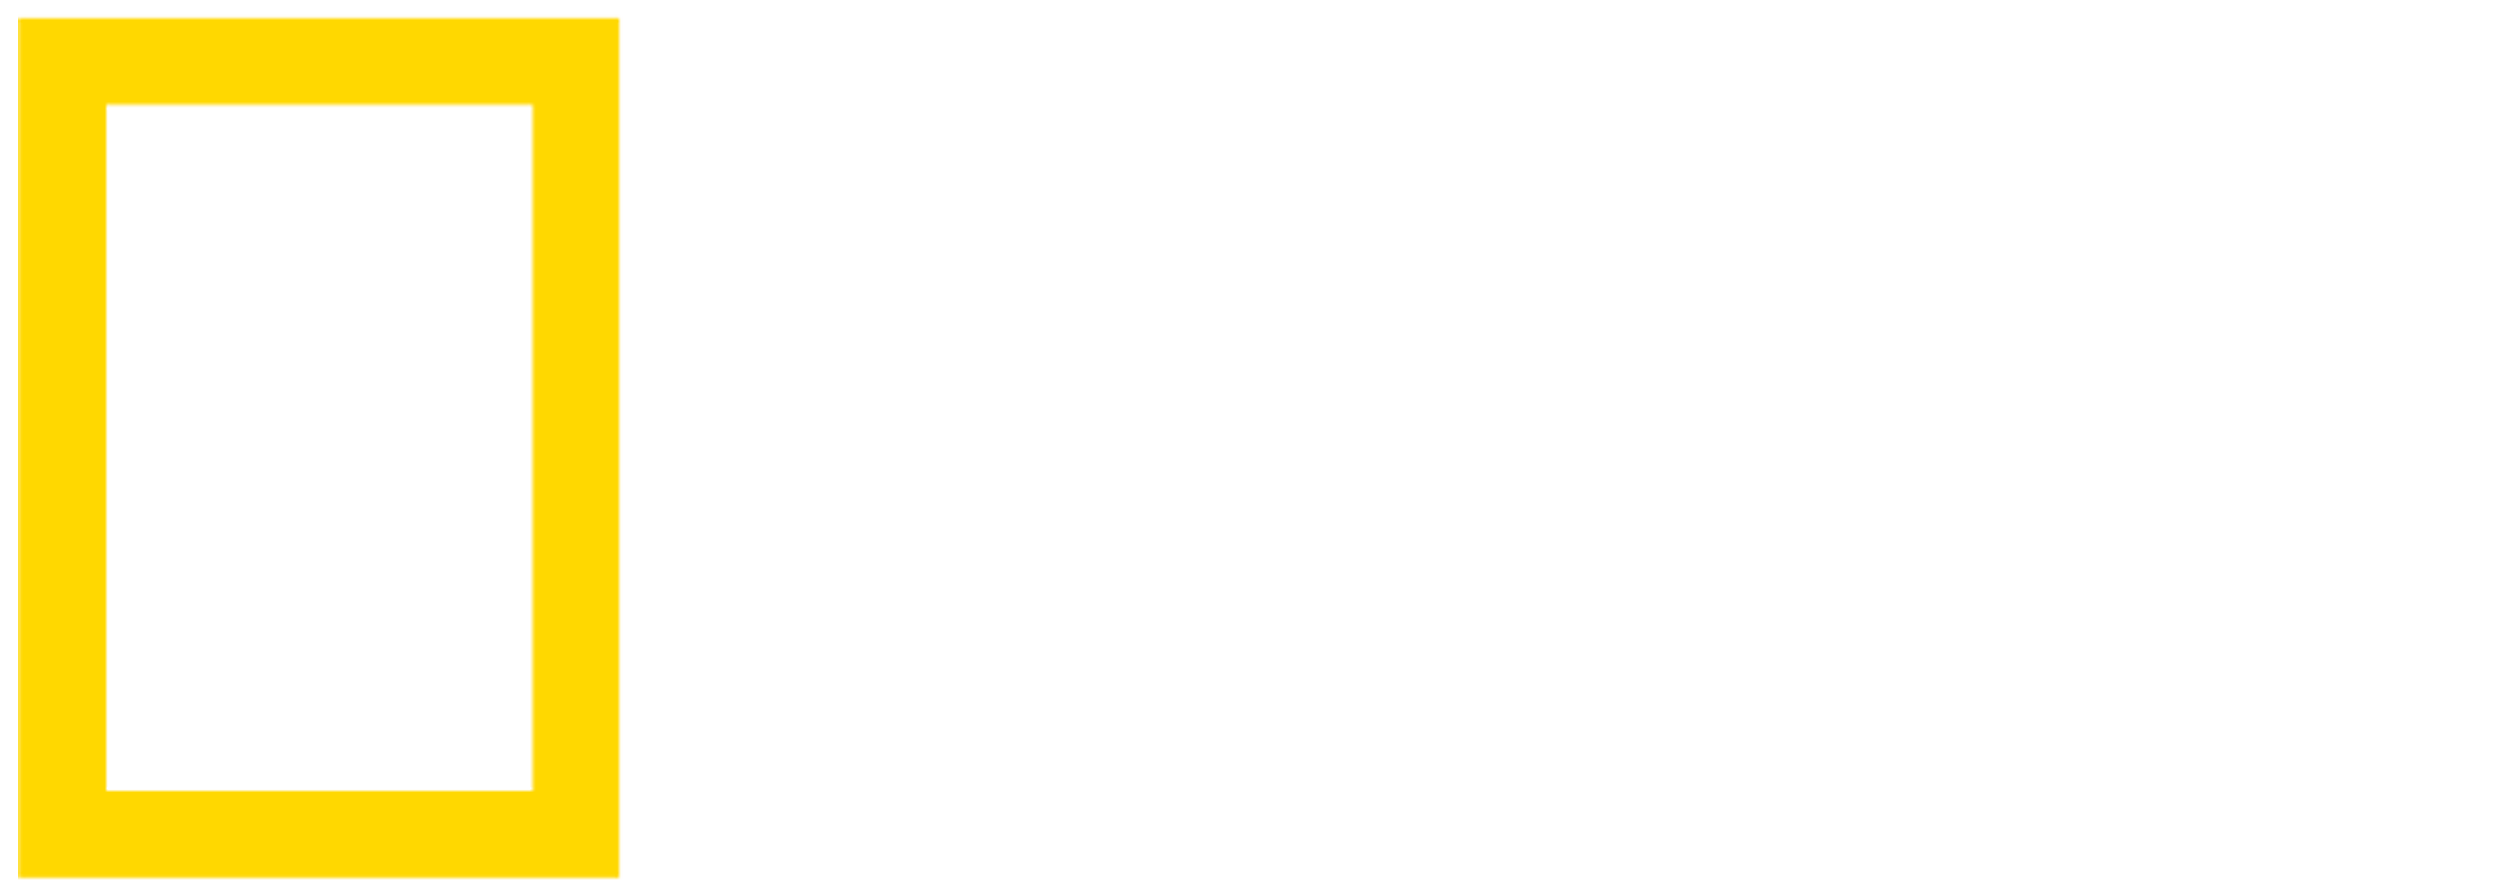 National Geographic Ngt - National Geographic Channel, Transparent background PNG HD thumbnail